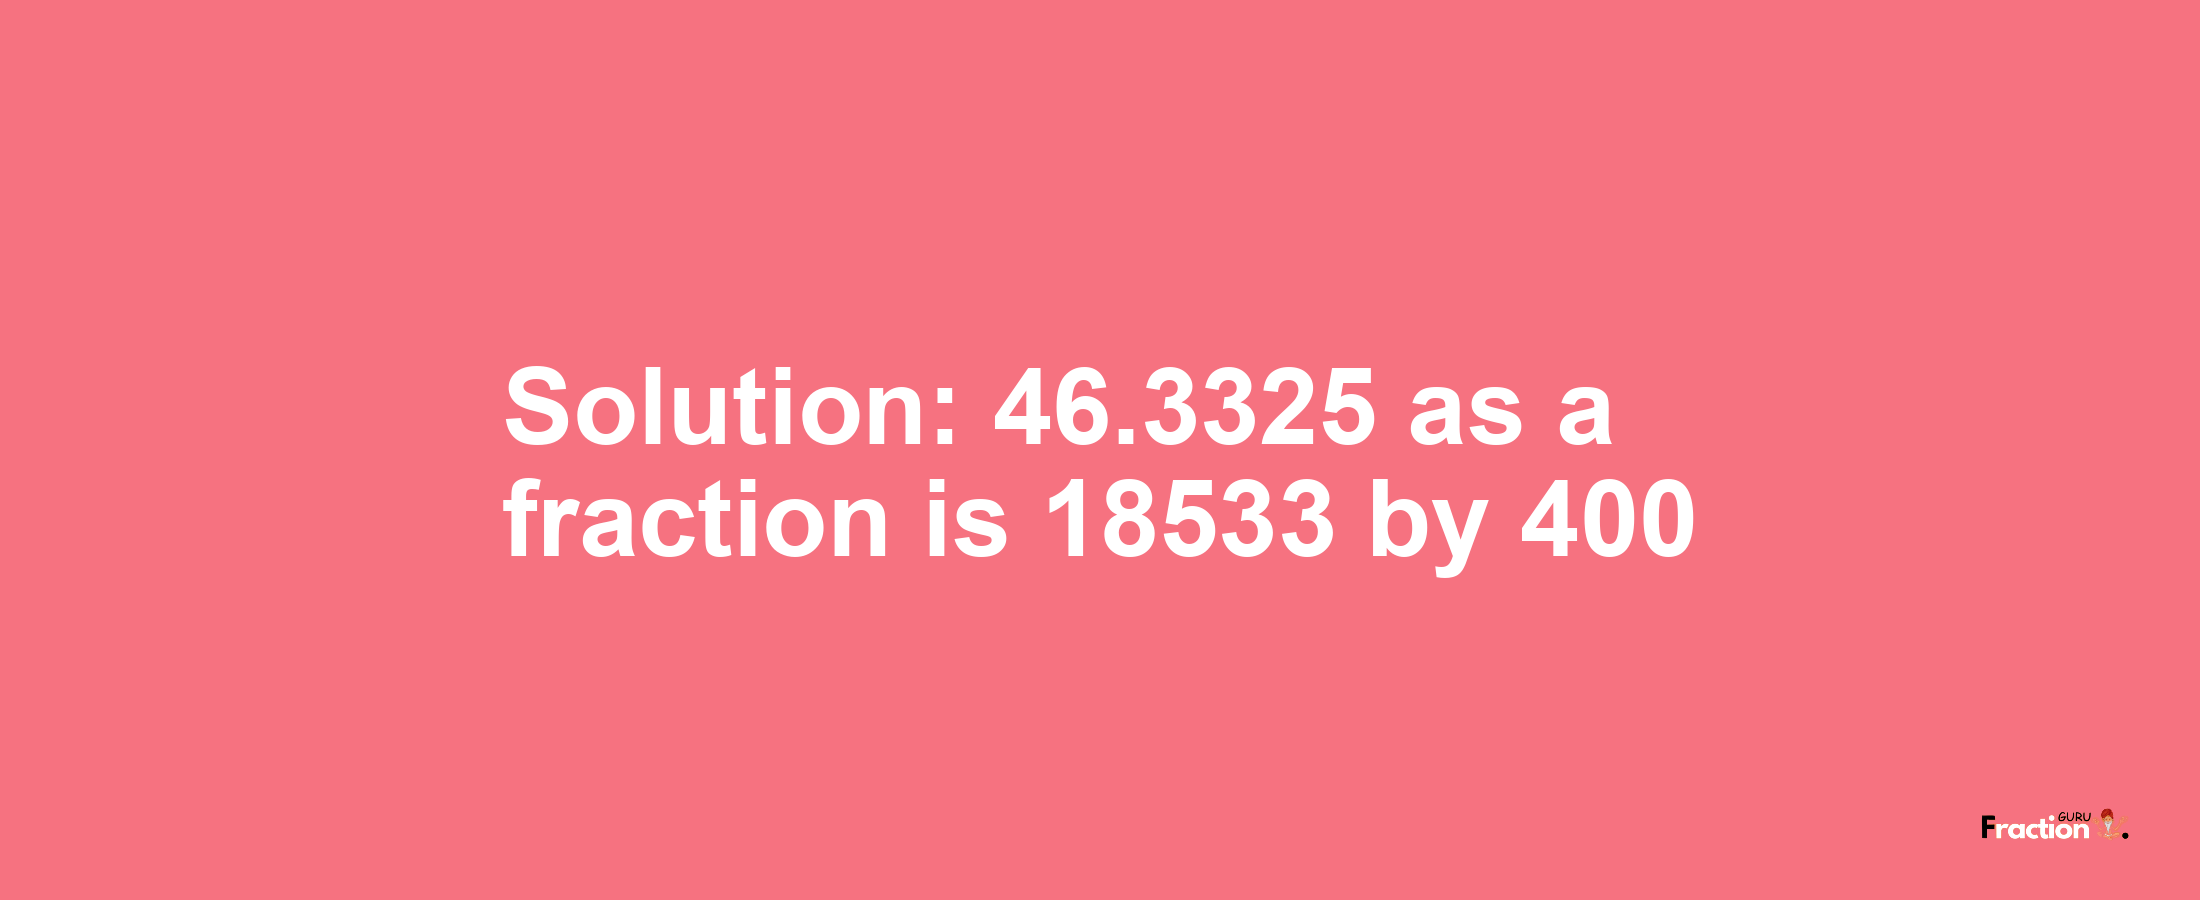 Solution:46.3325 as a fraction is 18533/400